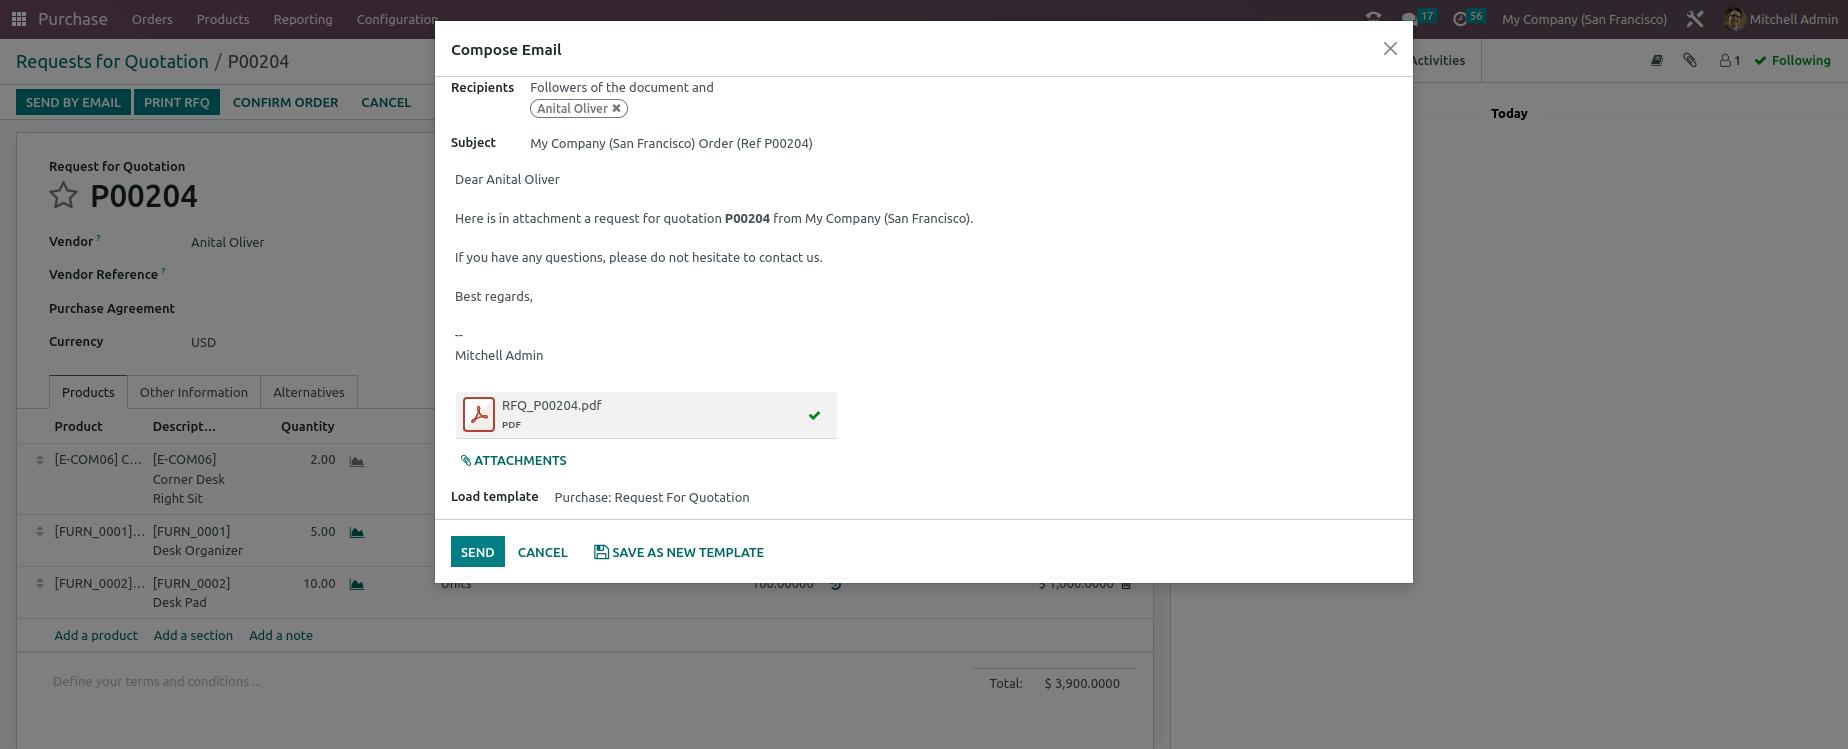 How to Lock Your Confirmed Purchase Orders in Odoo 16-cybrosys